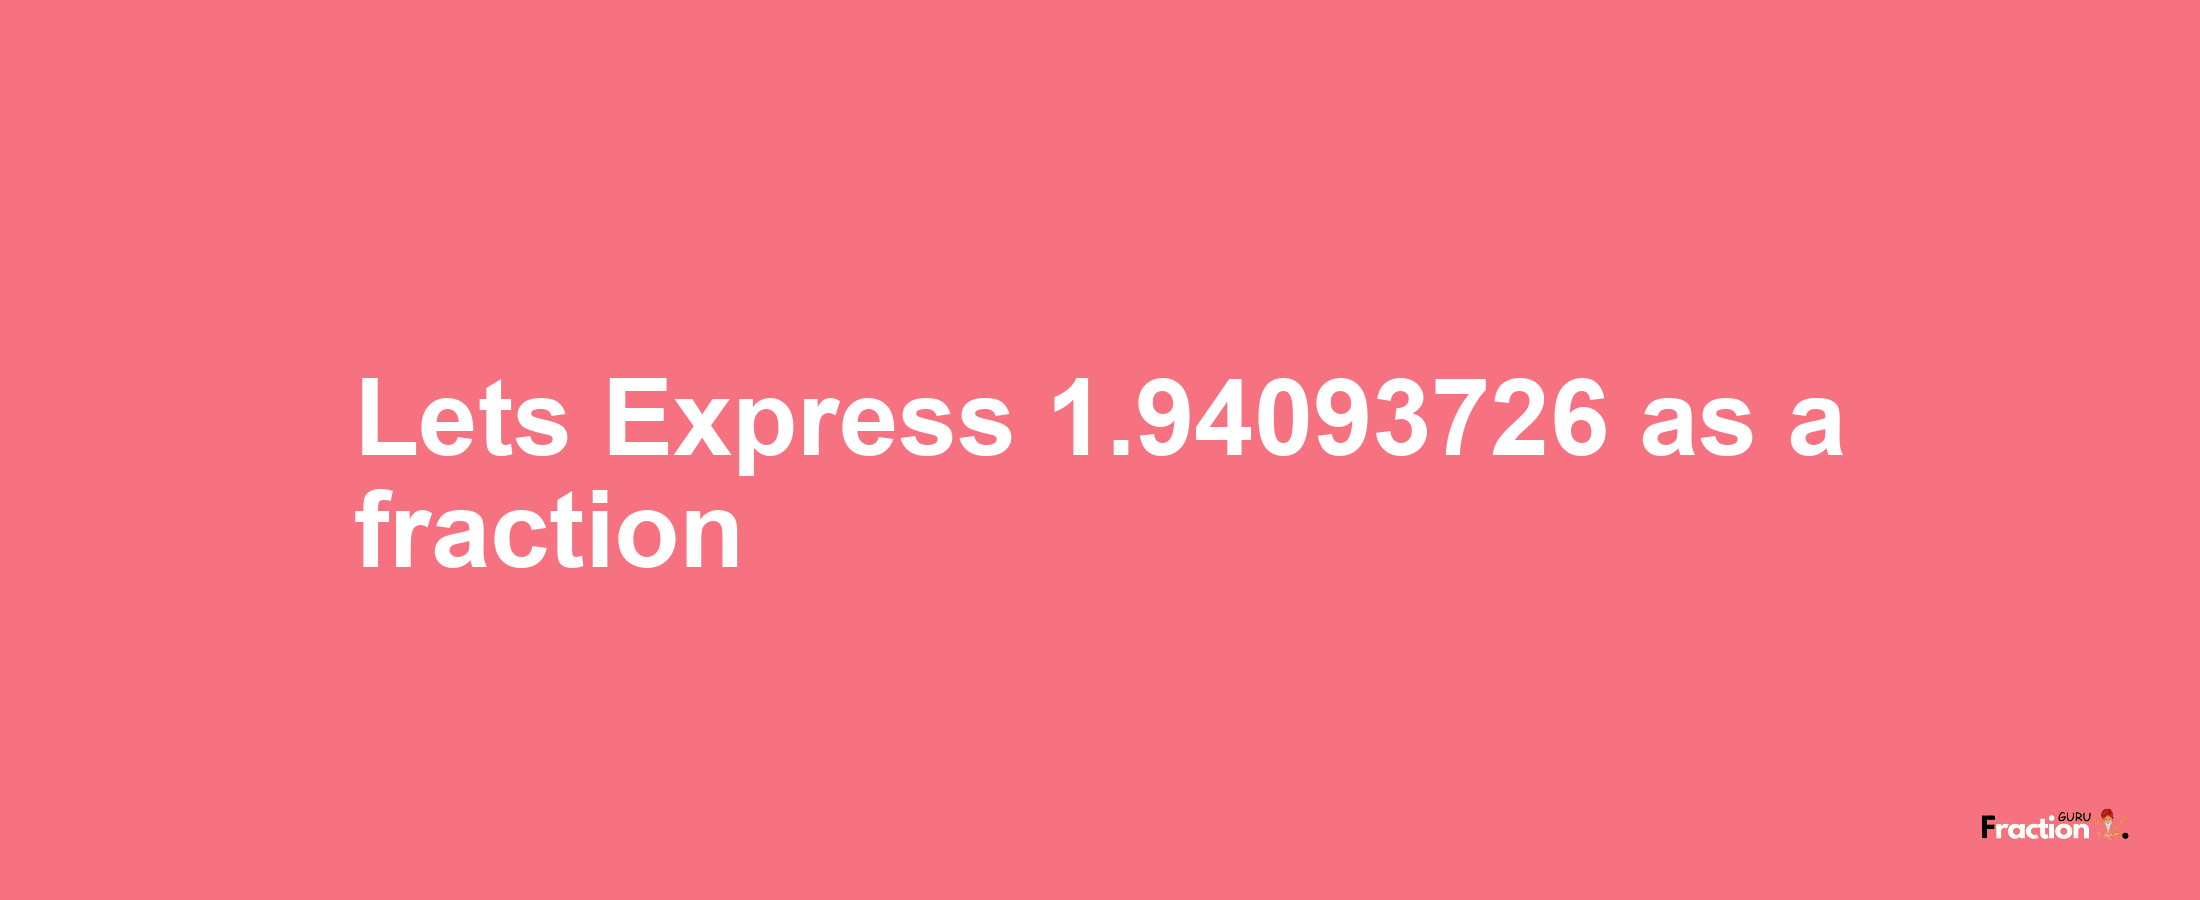 Lets Express 1.94093726 as afraction